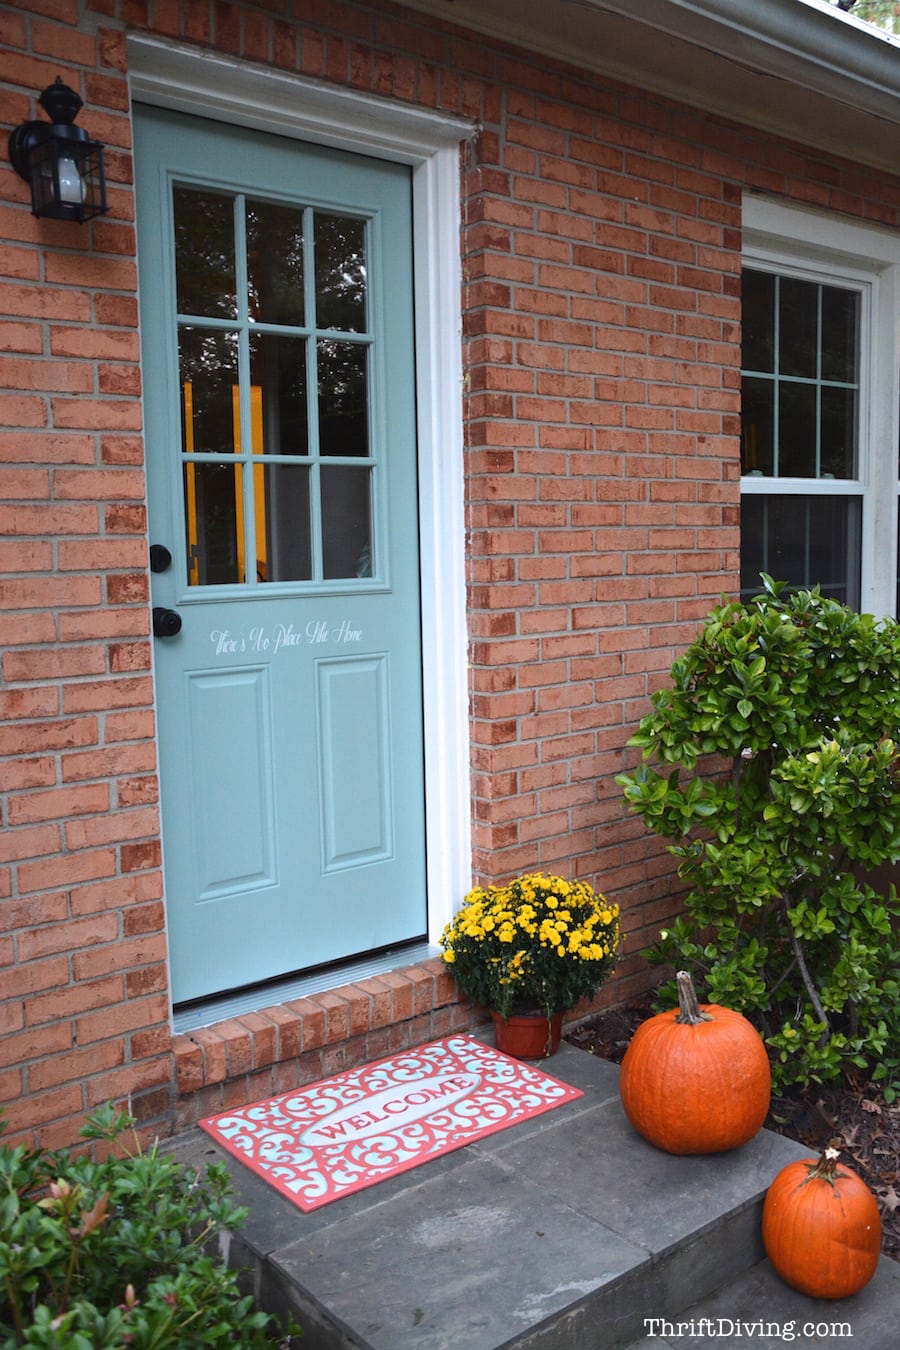 How to Paint and Stencil Your Door - DIY Door Makeover - ThriftDiving.com